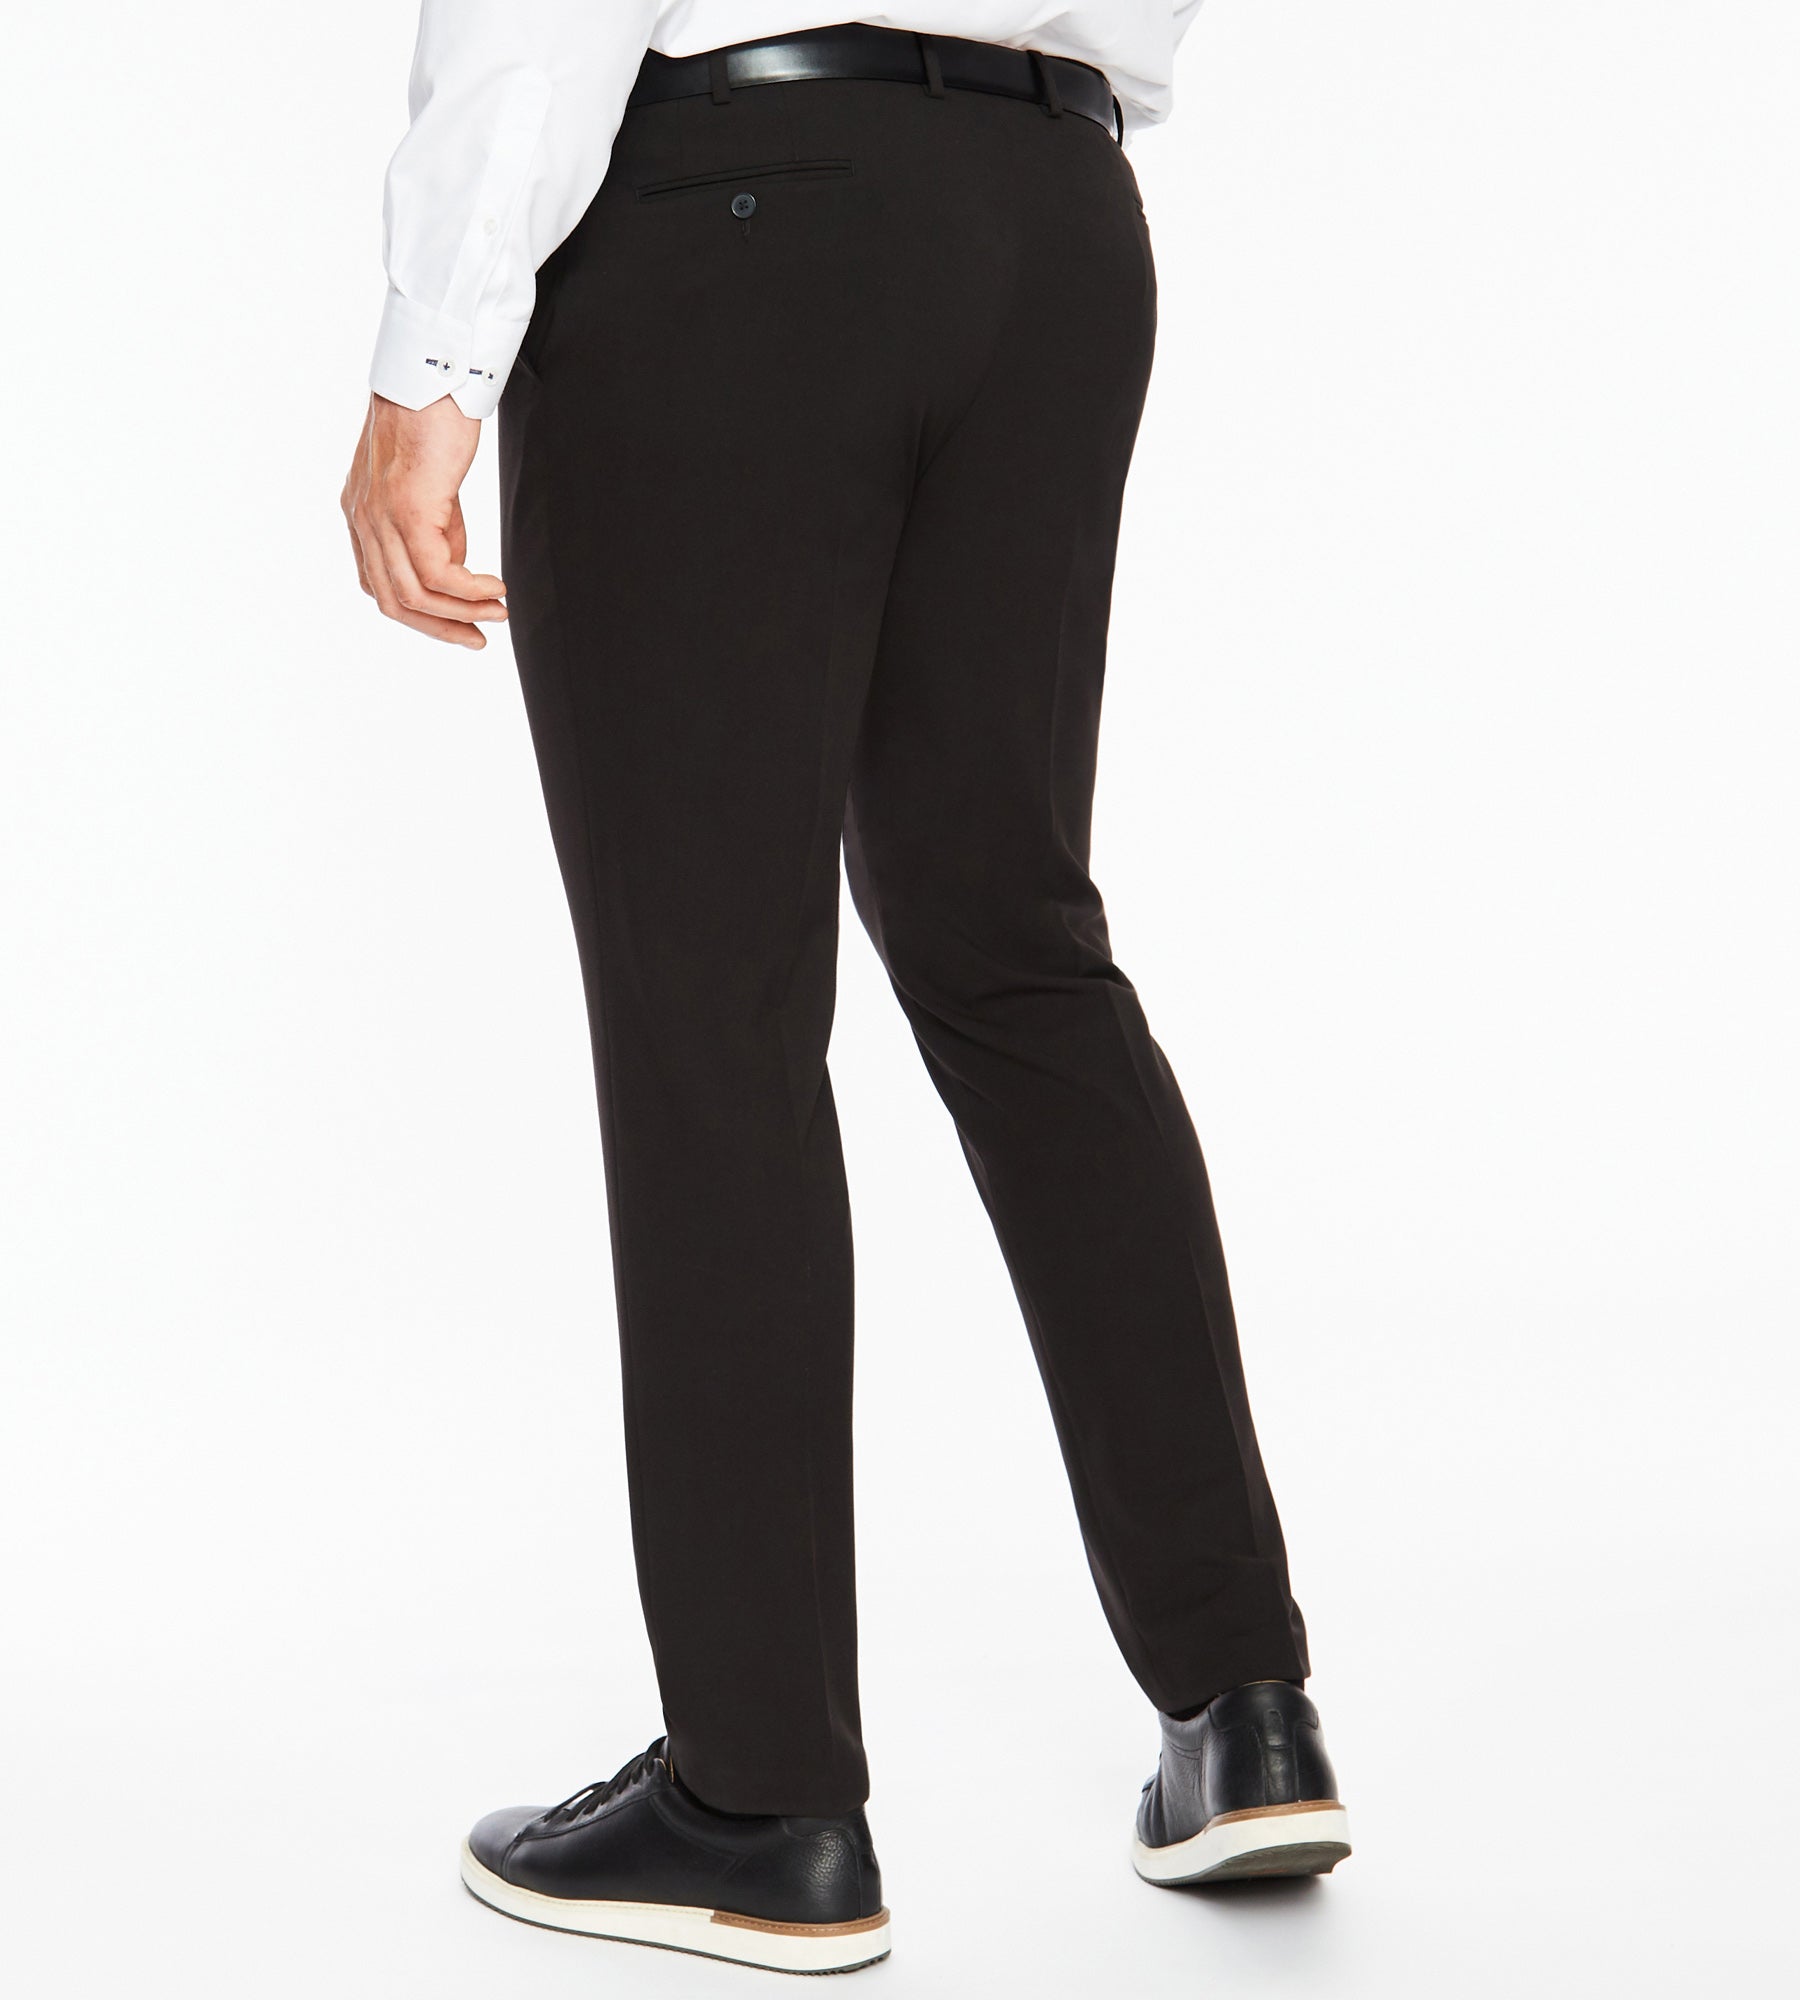 Clothing & Shoes - Bottoms - Pants - Mr. Max Signature Modern